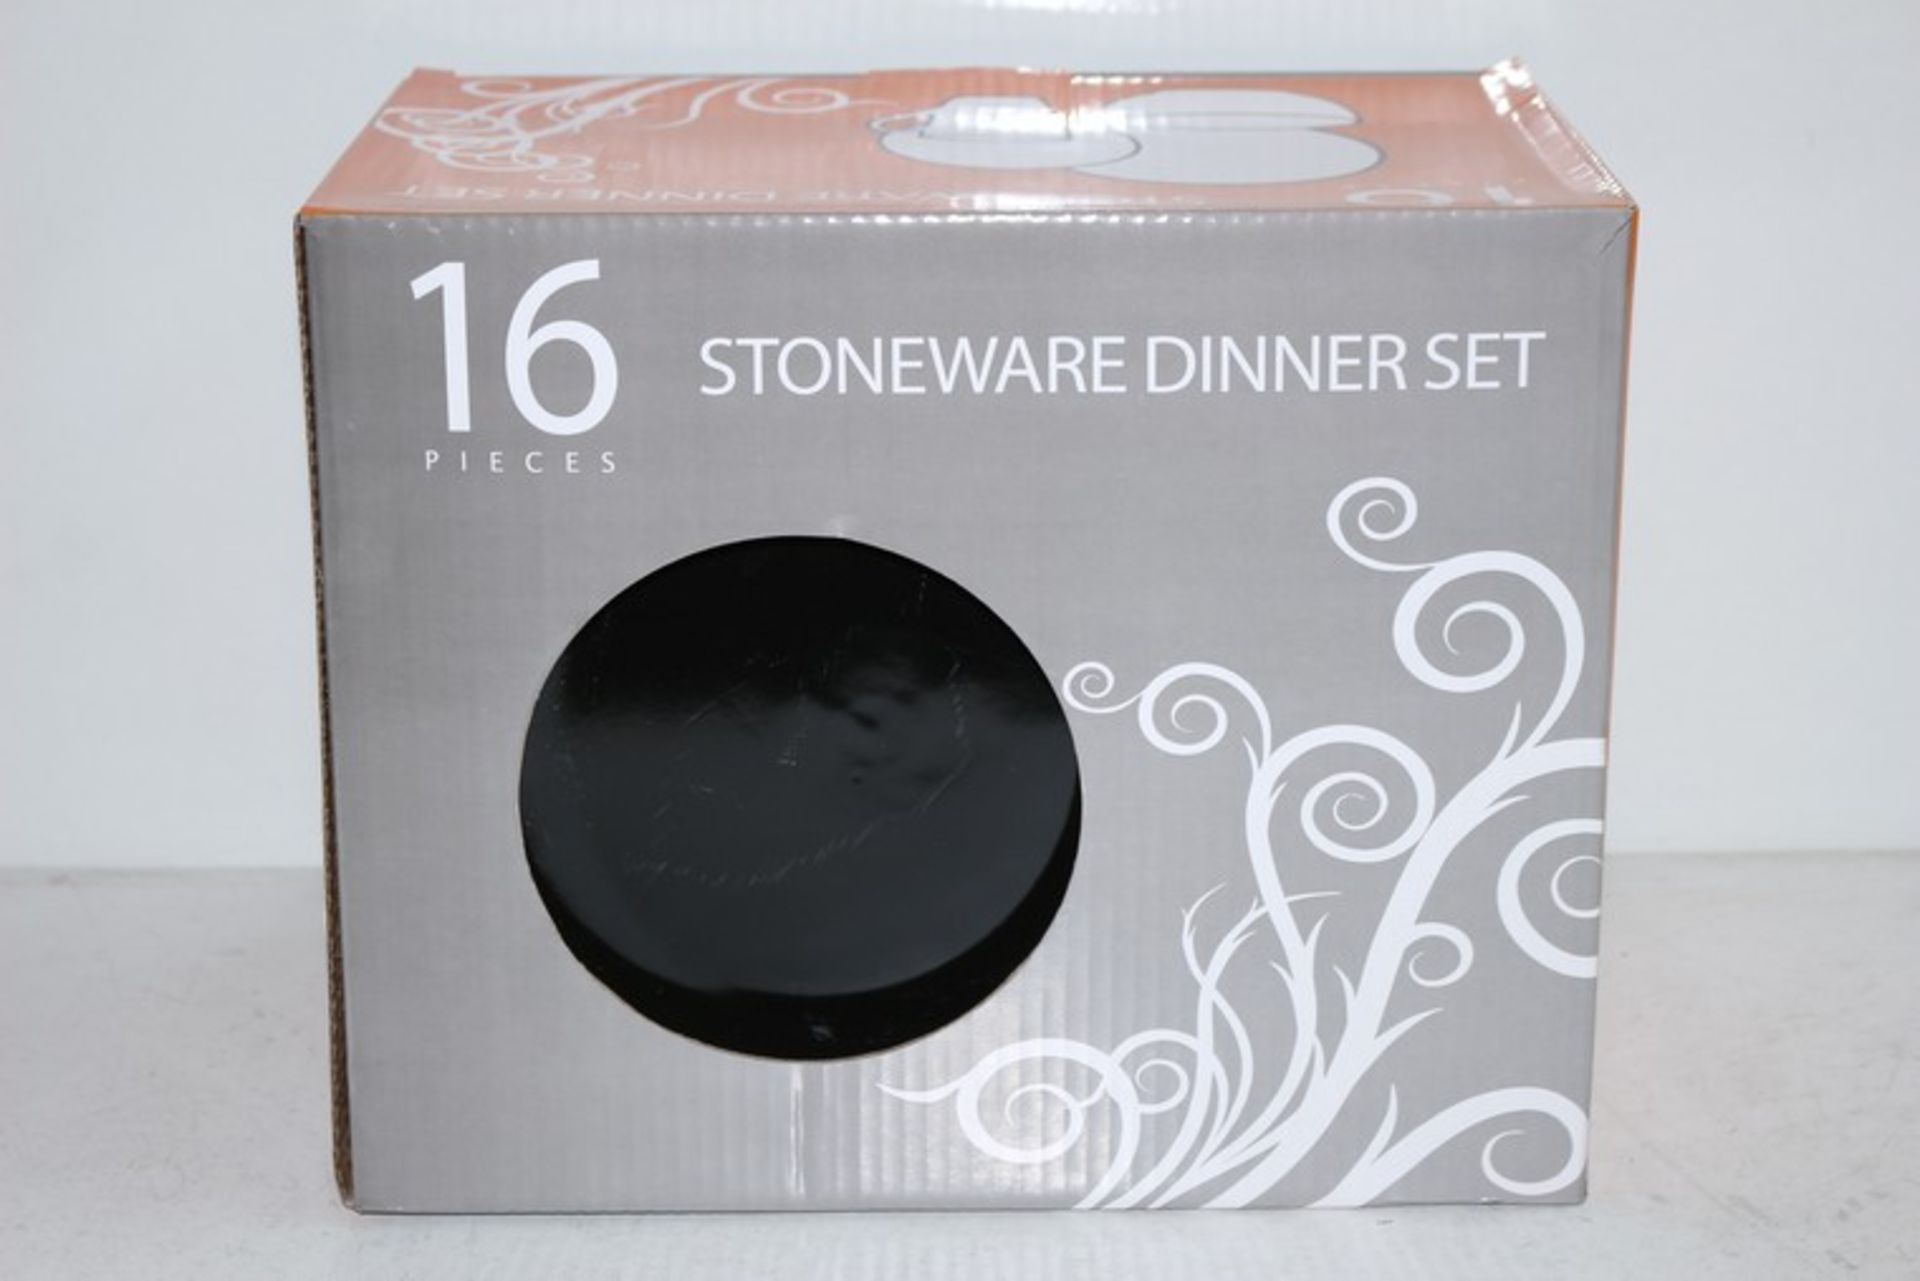 1 x BOXED BRAND NEW 16 PIECE DINNER WARE SET IN SET IN BLACK *PLEASE NOTE THAT THE BID PRICE IS